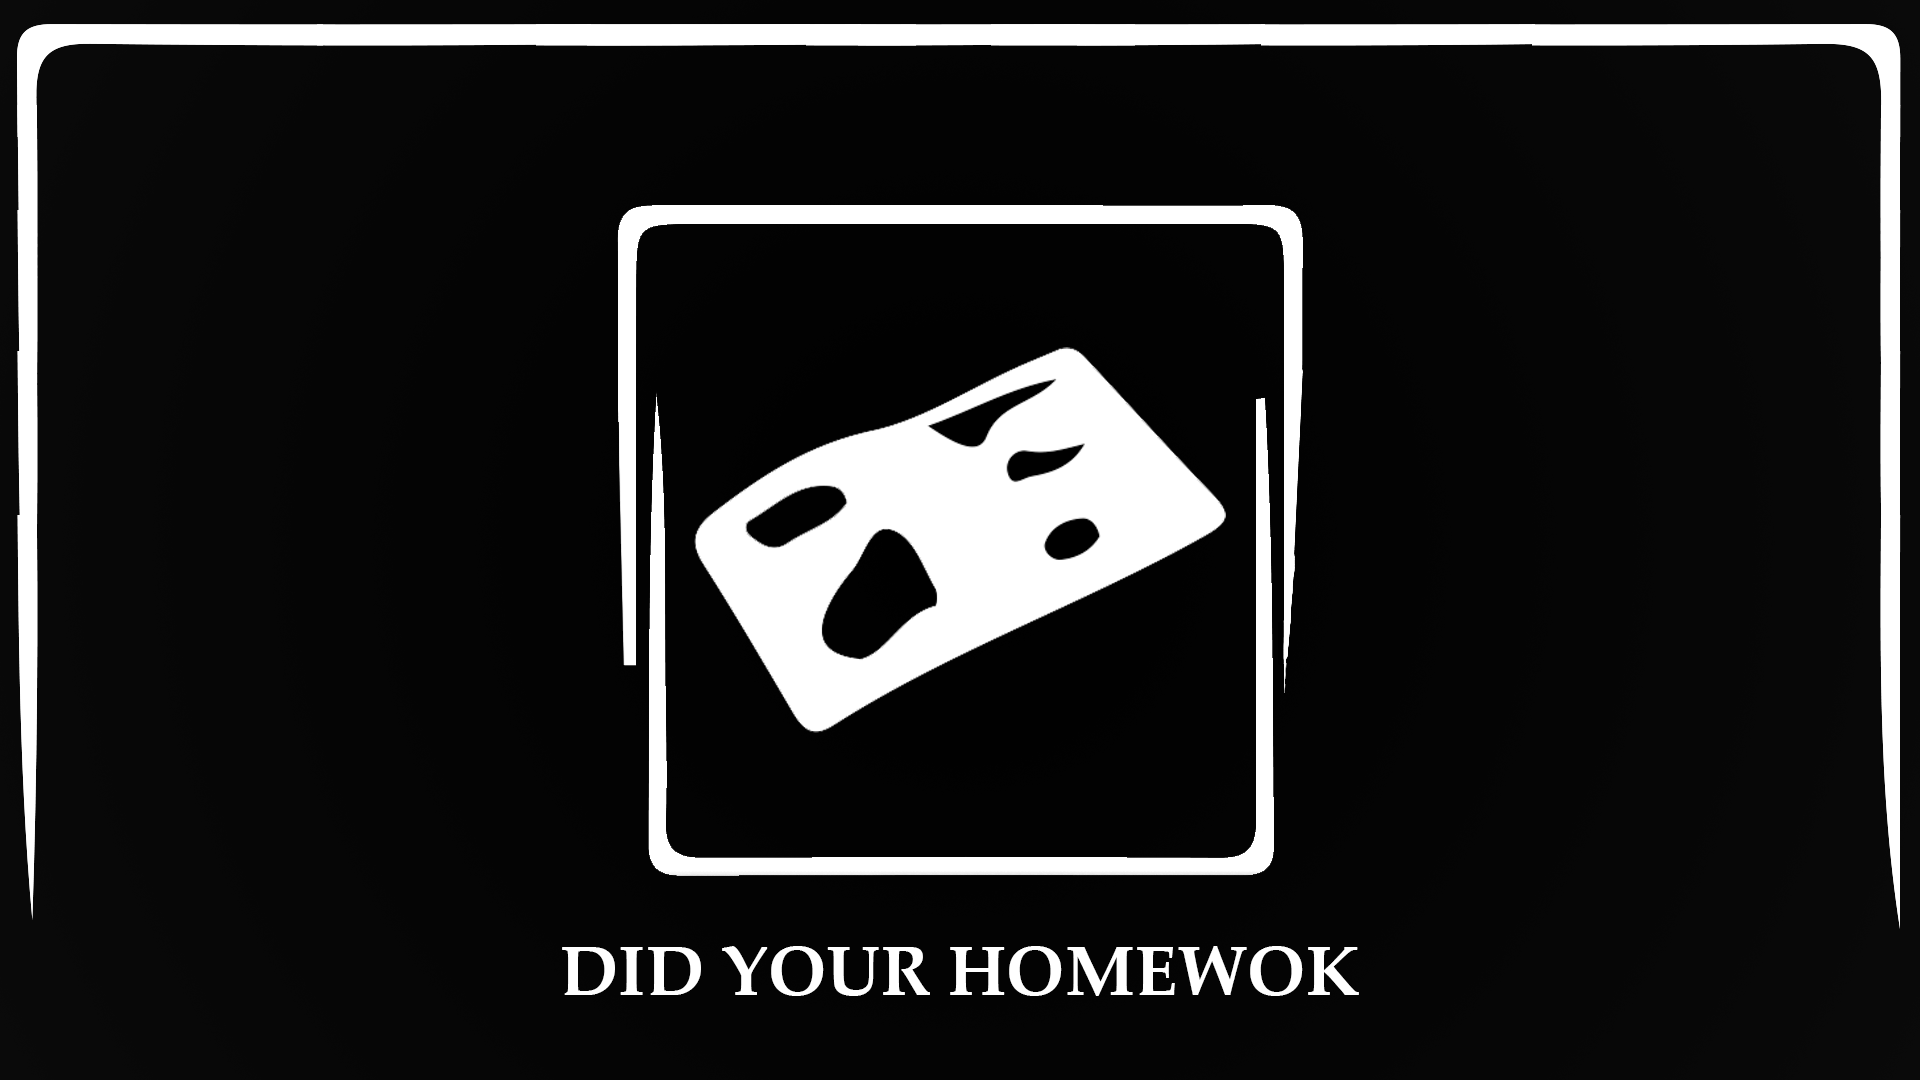 Did your homework